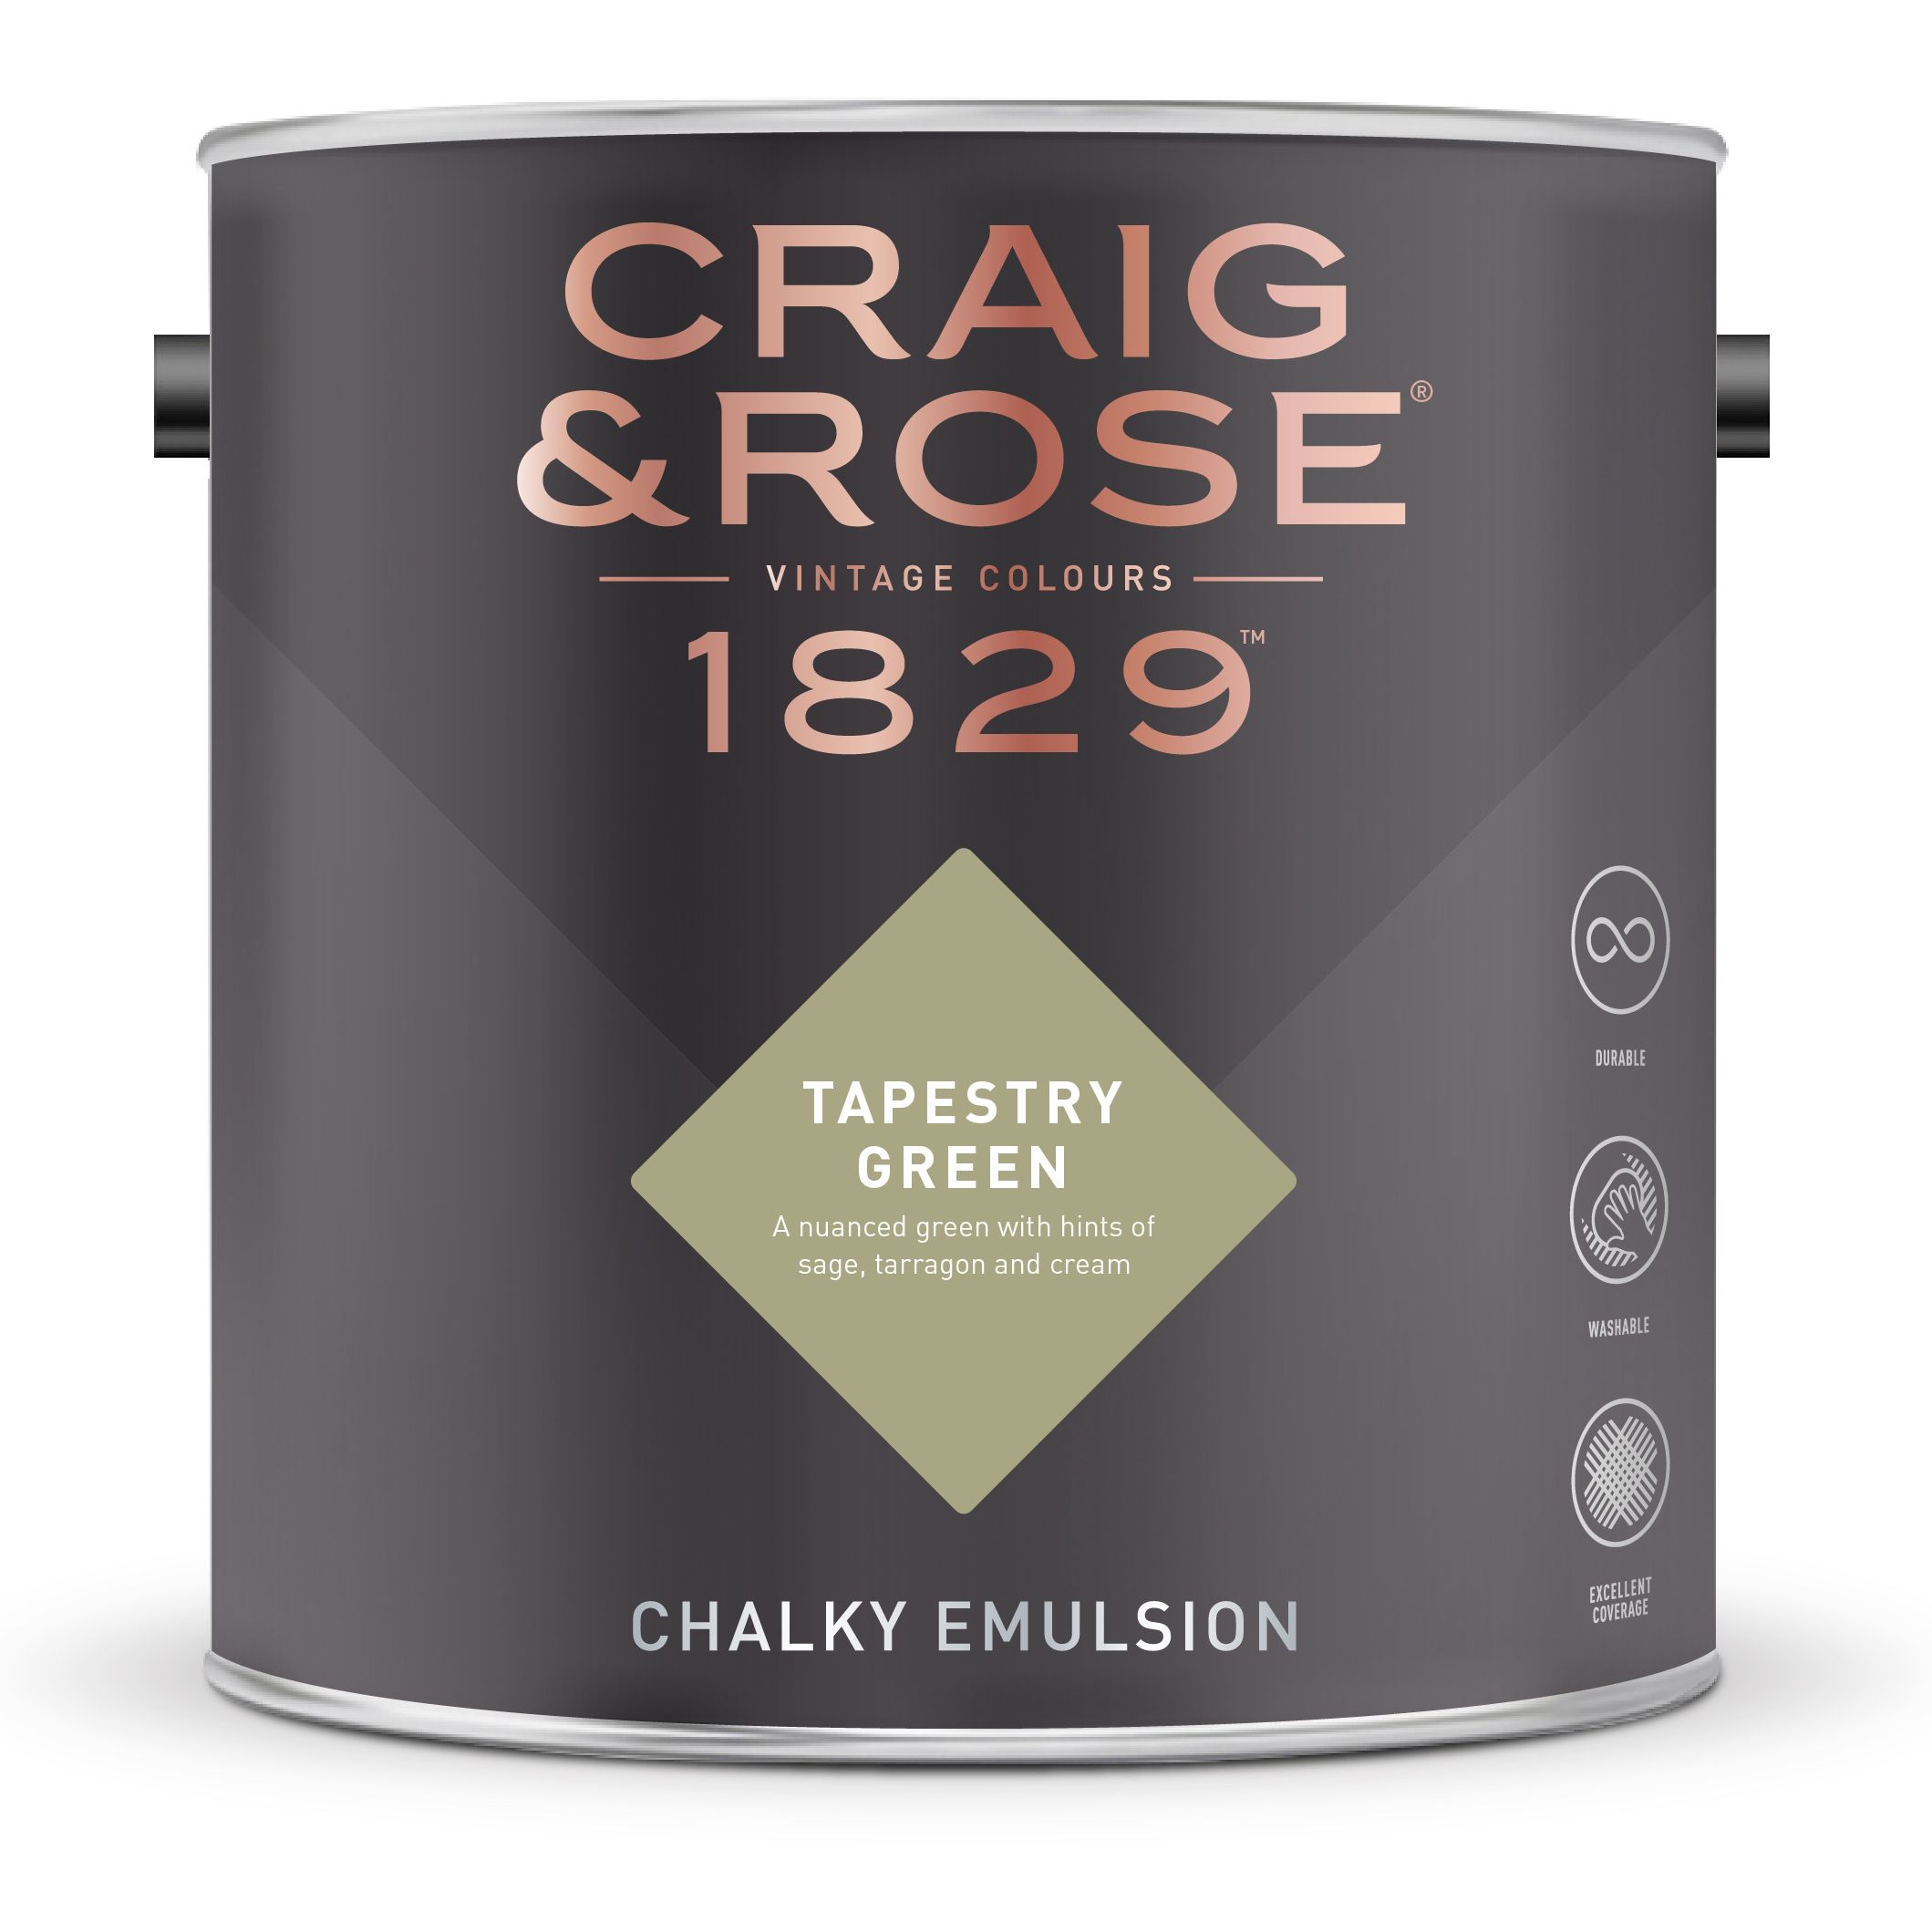 Craig & Rose 1829 Tapestry Green Chalky Emulsion paint, 2.5L